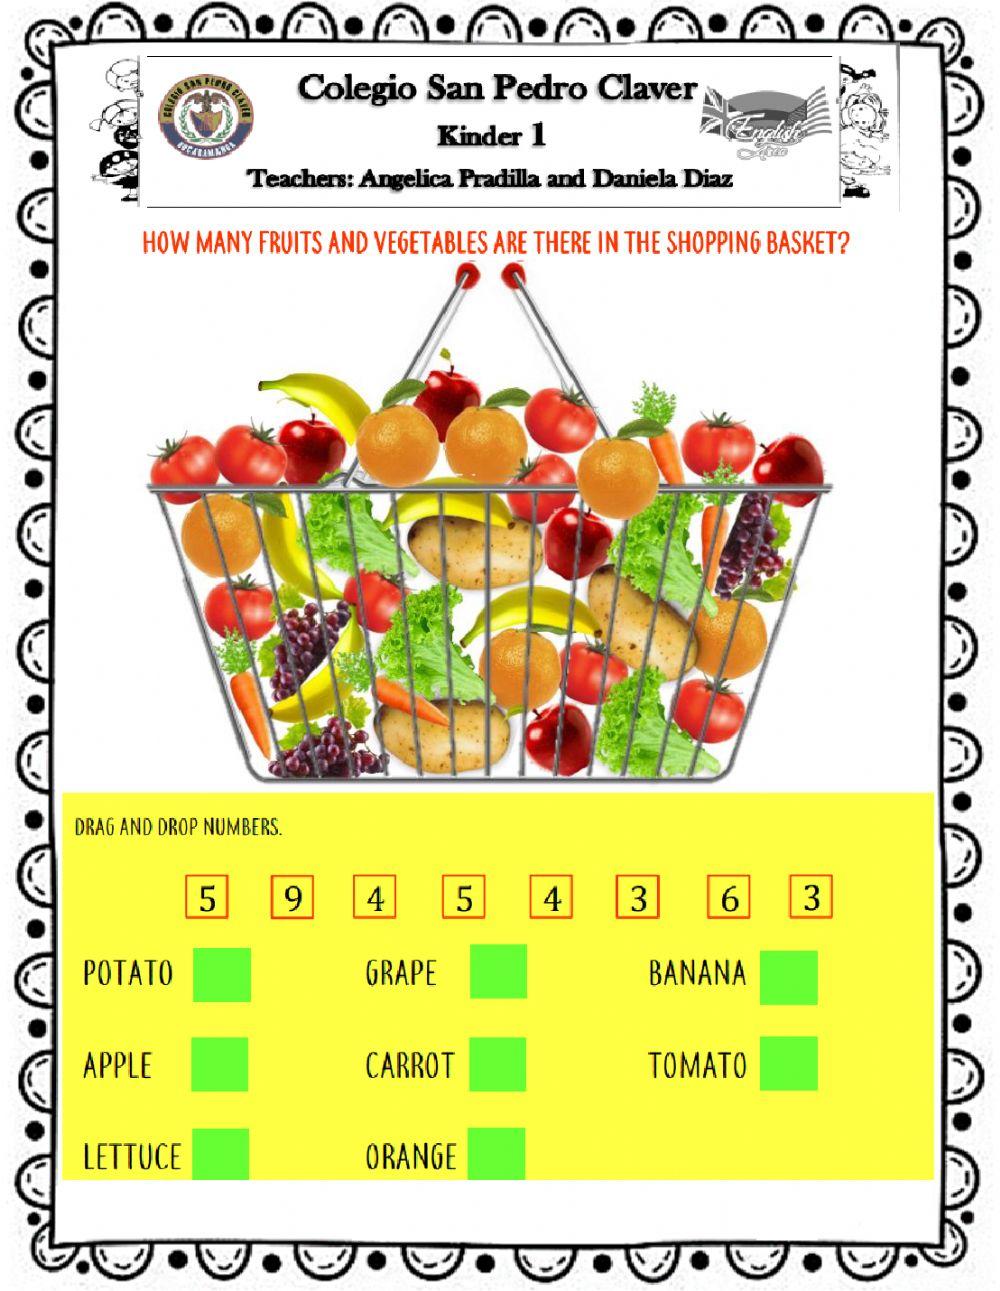 Counting Fruits and Veggies